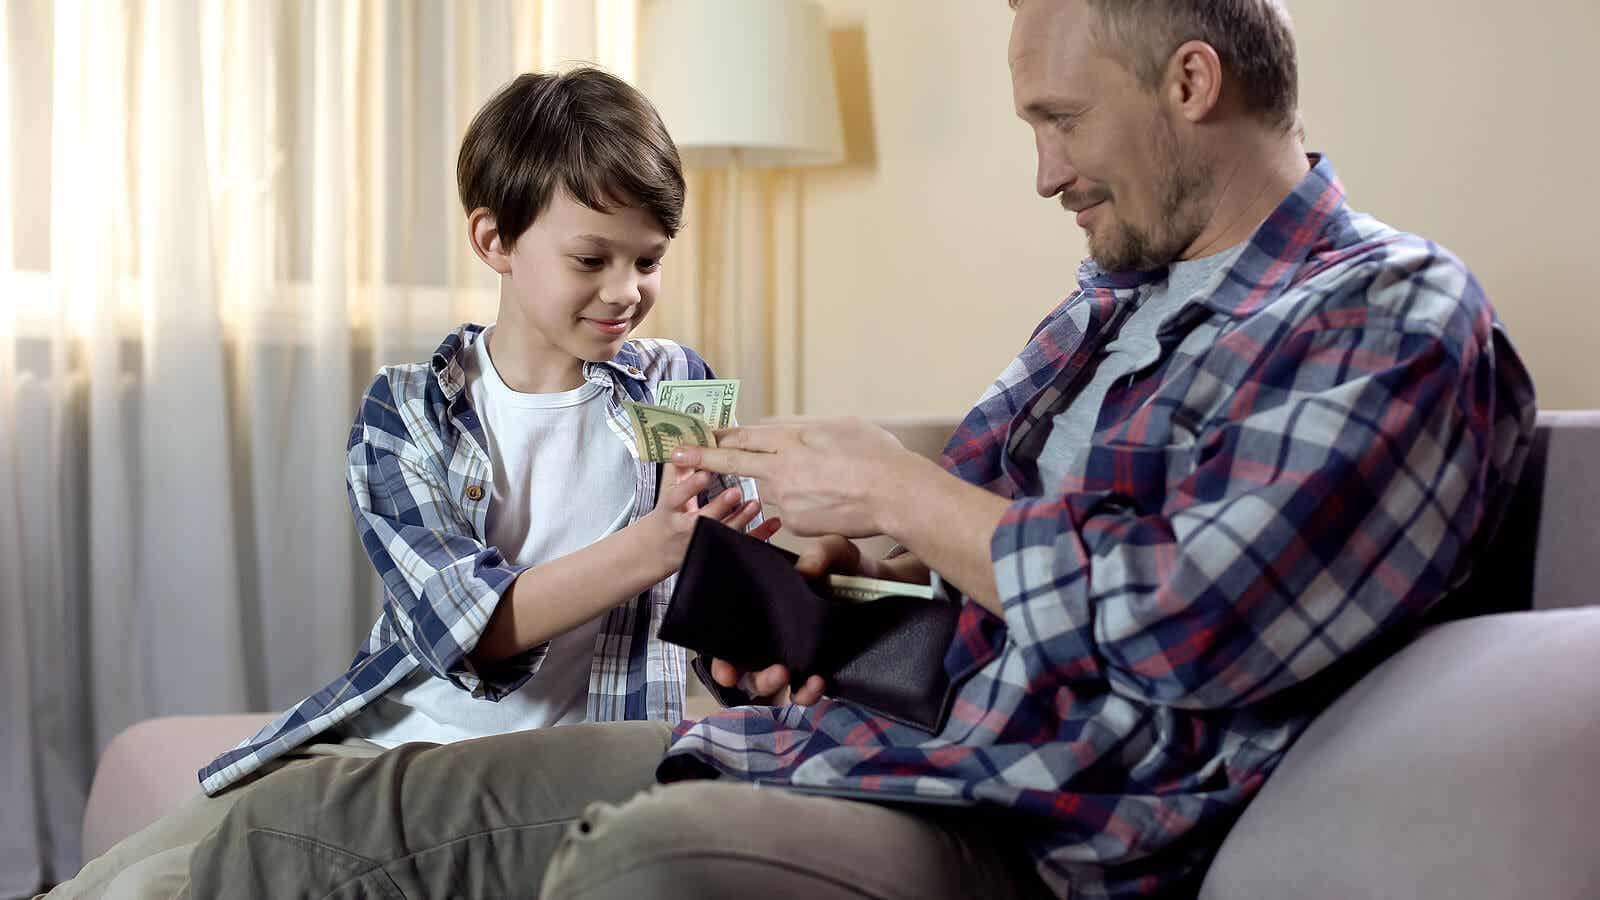 A father giving money from his wallet to his young son.